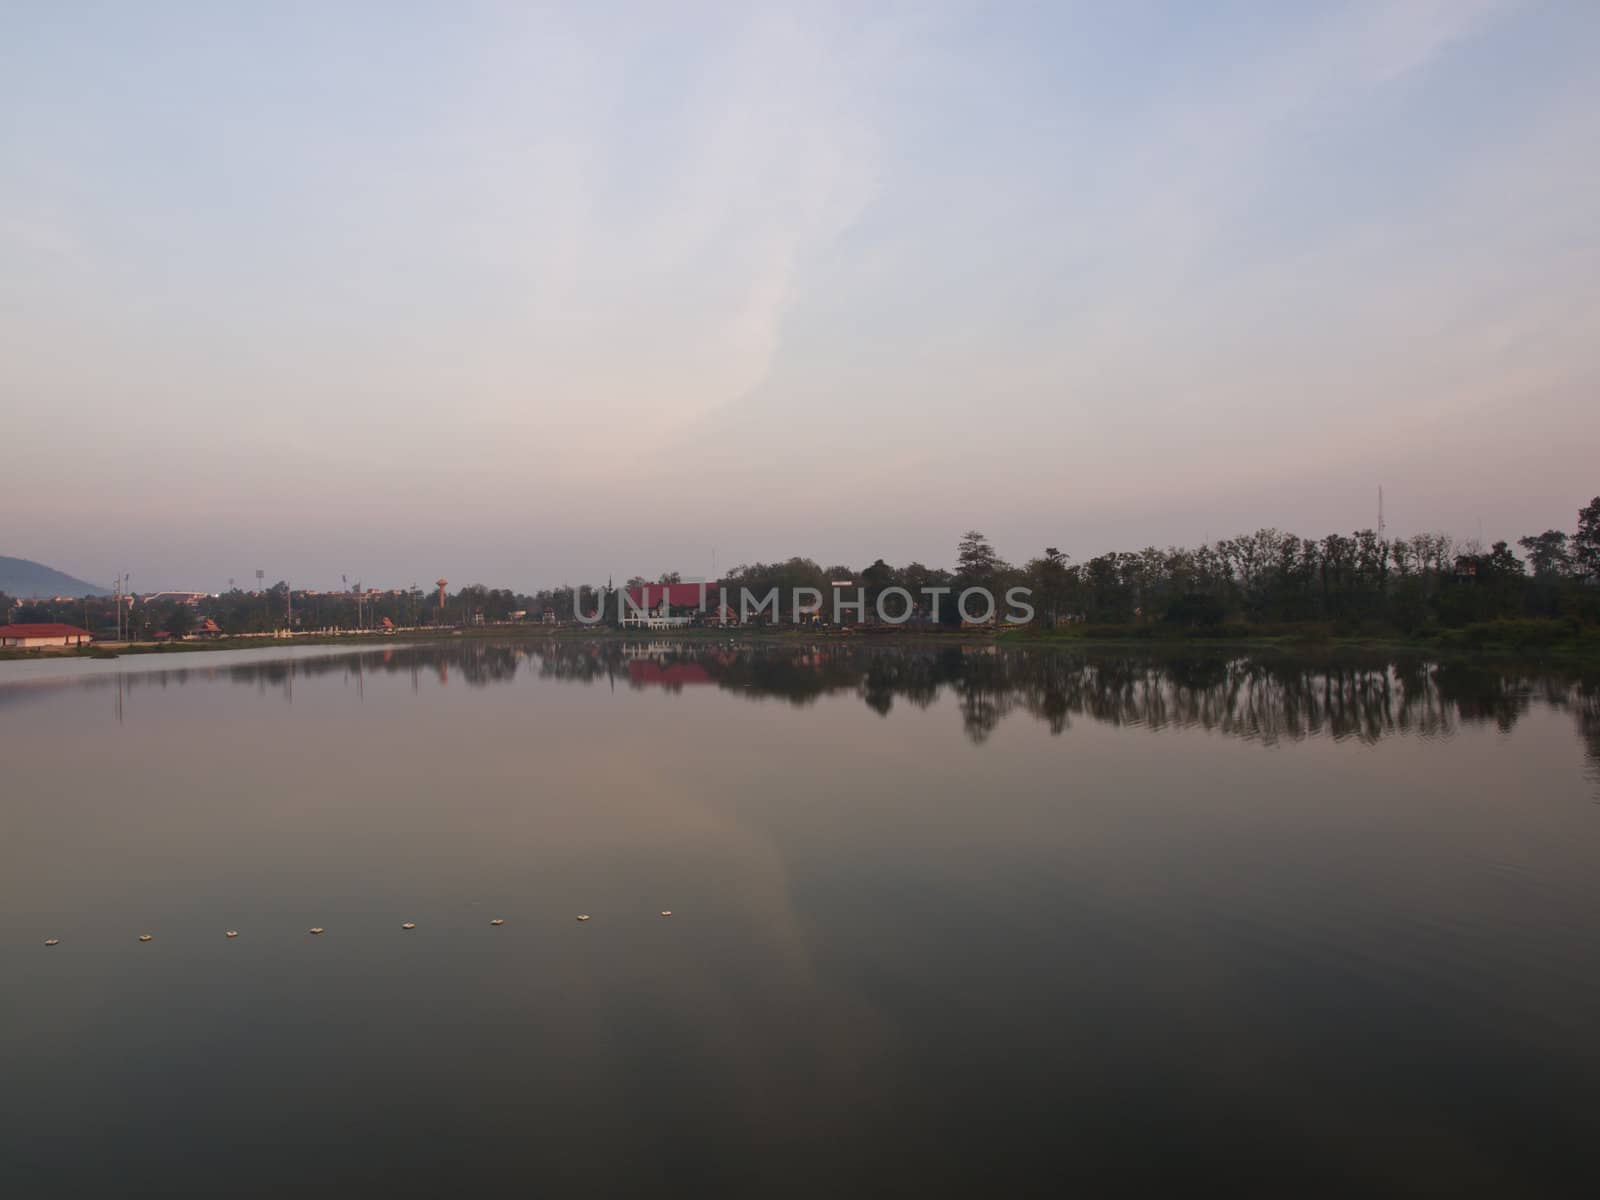 Morning breaks over the glassy still lake and tree background by gururugu